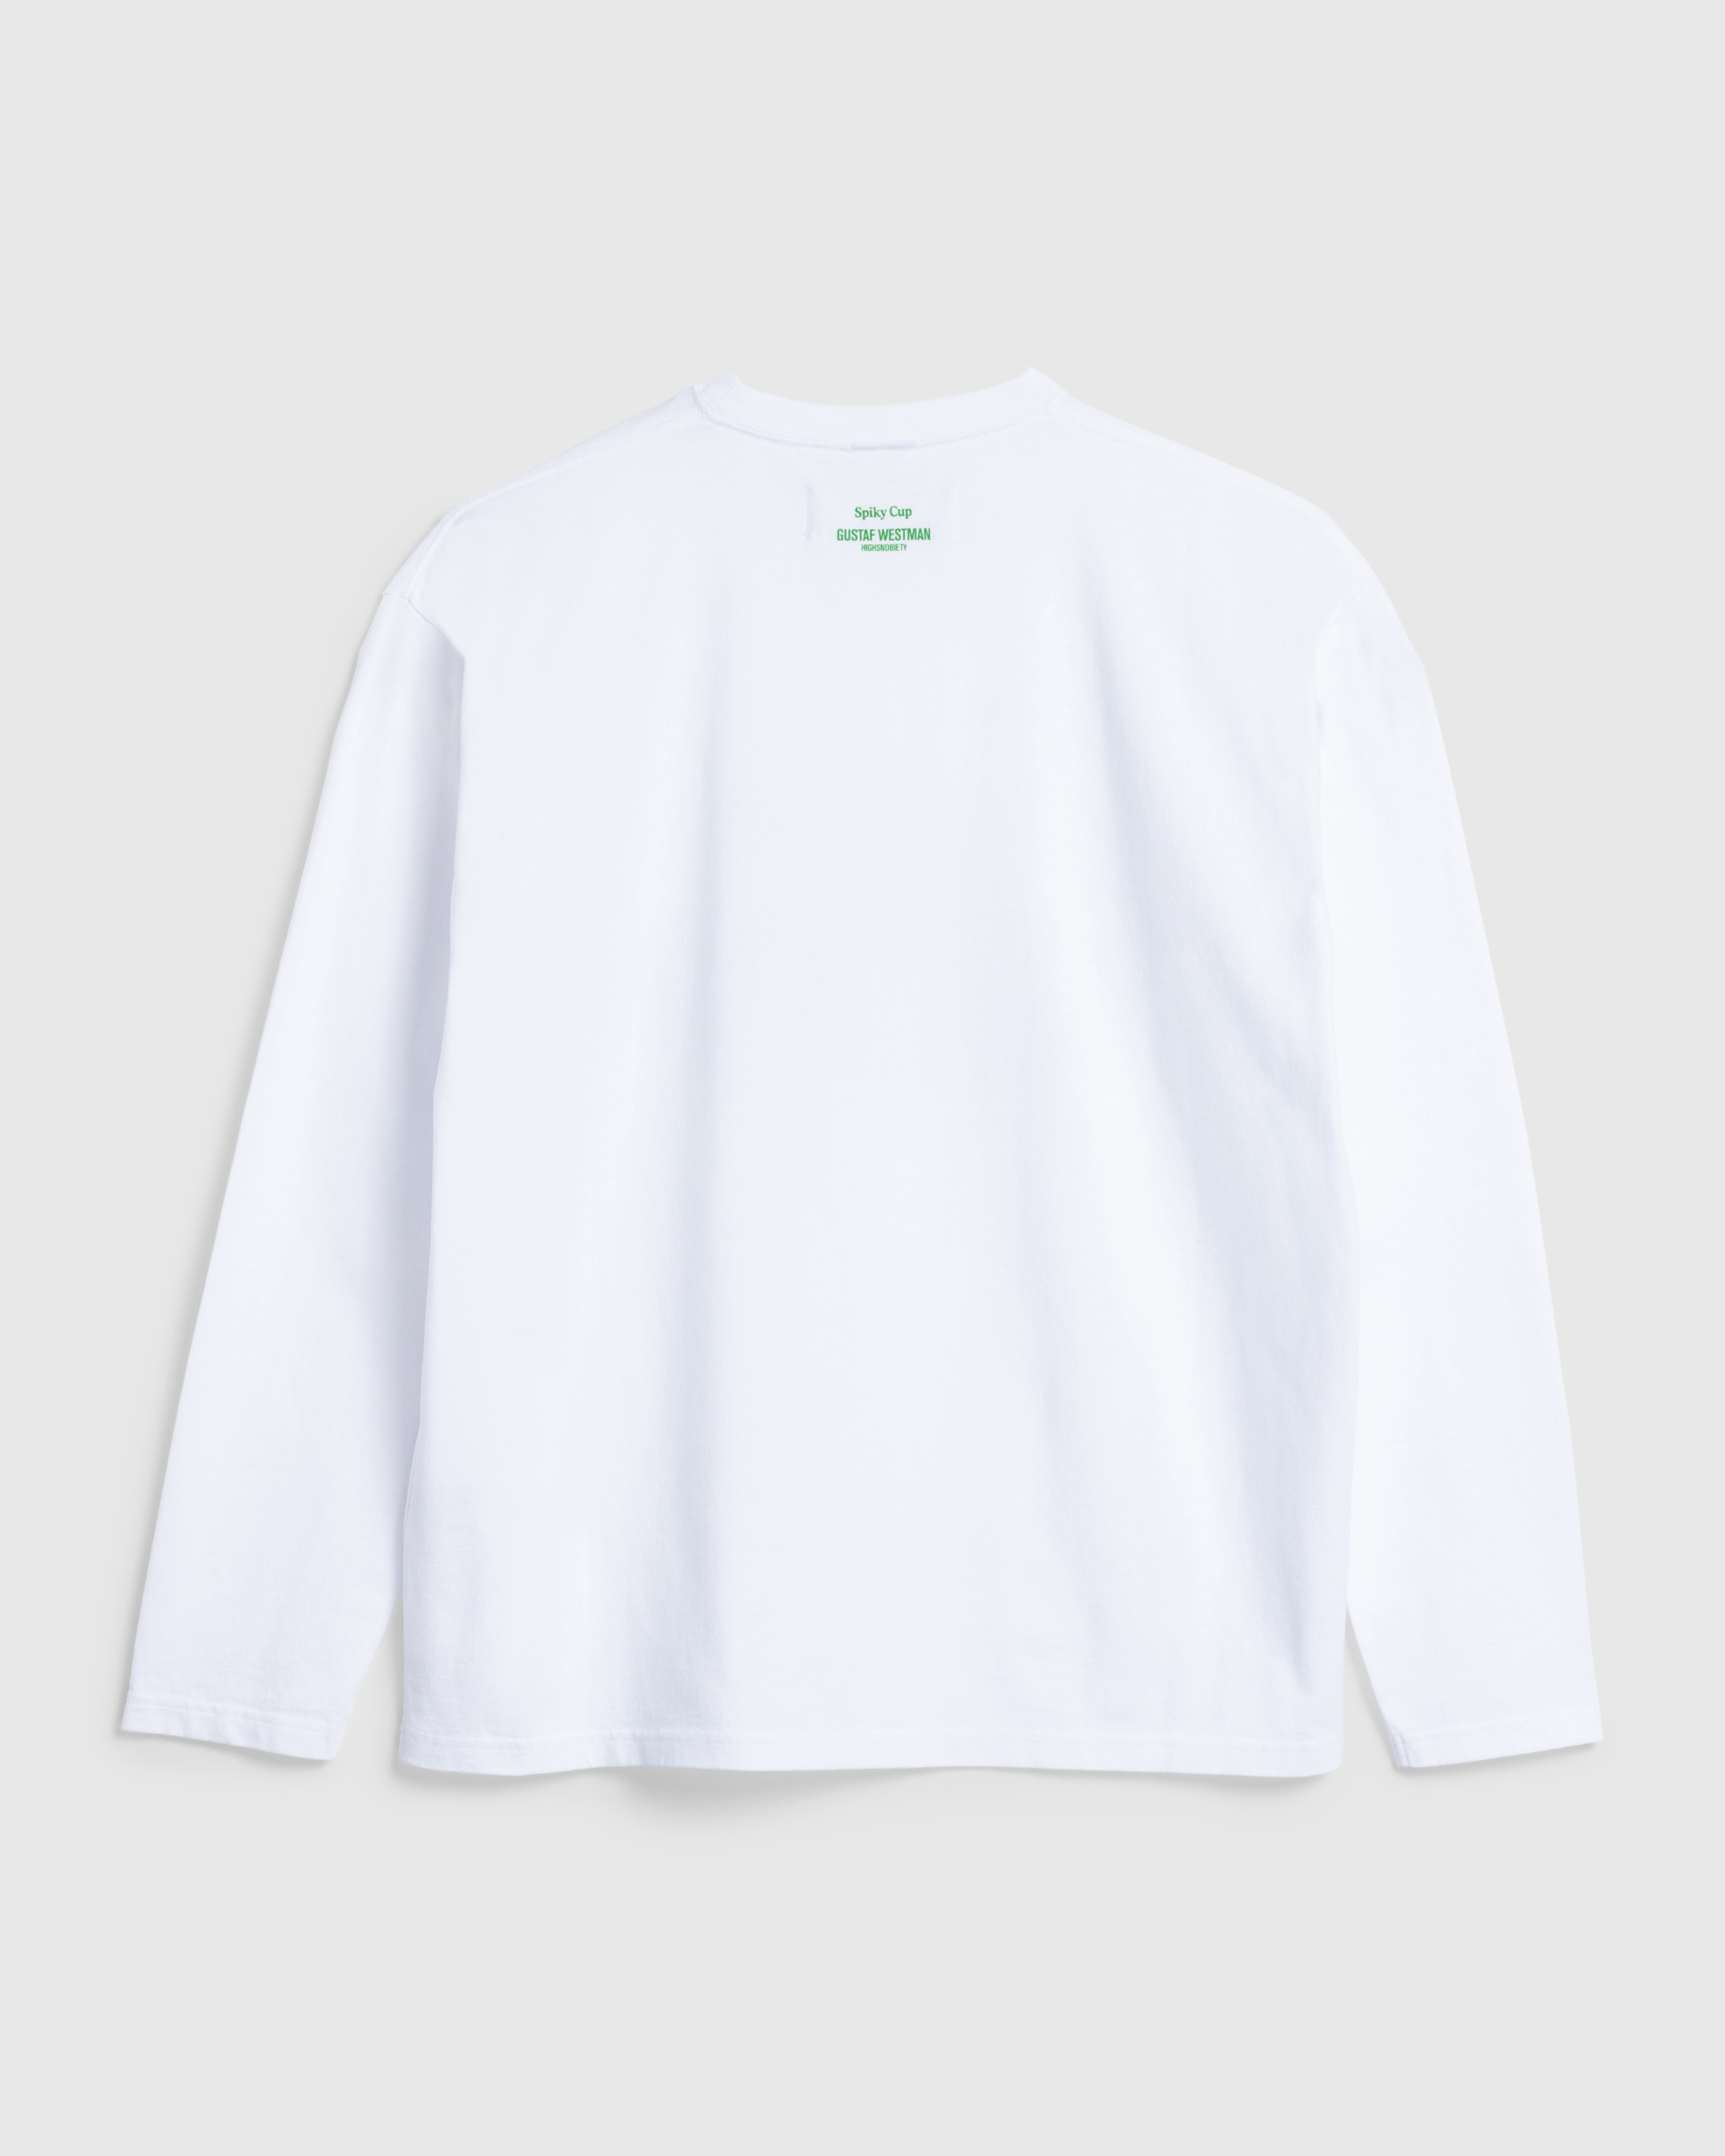 Highsnobiety x Gustaf Westman – Spiky Cup and Saucer Long-Sleeve White  - Longsleeves - White - Image 6